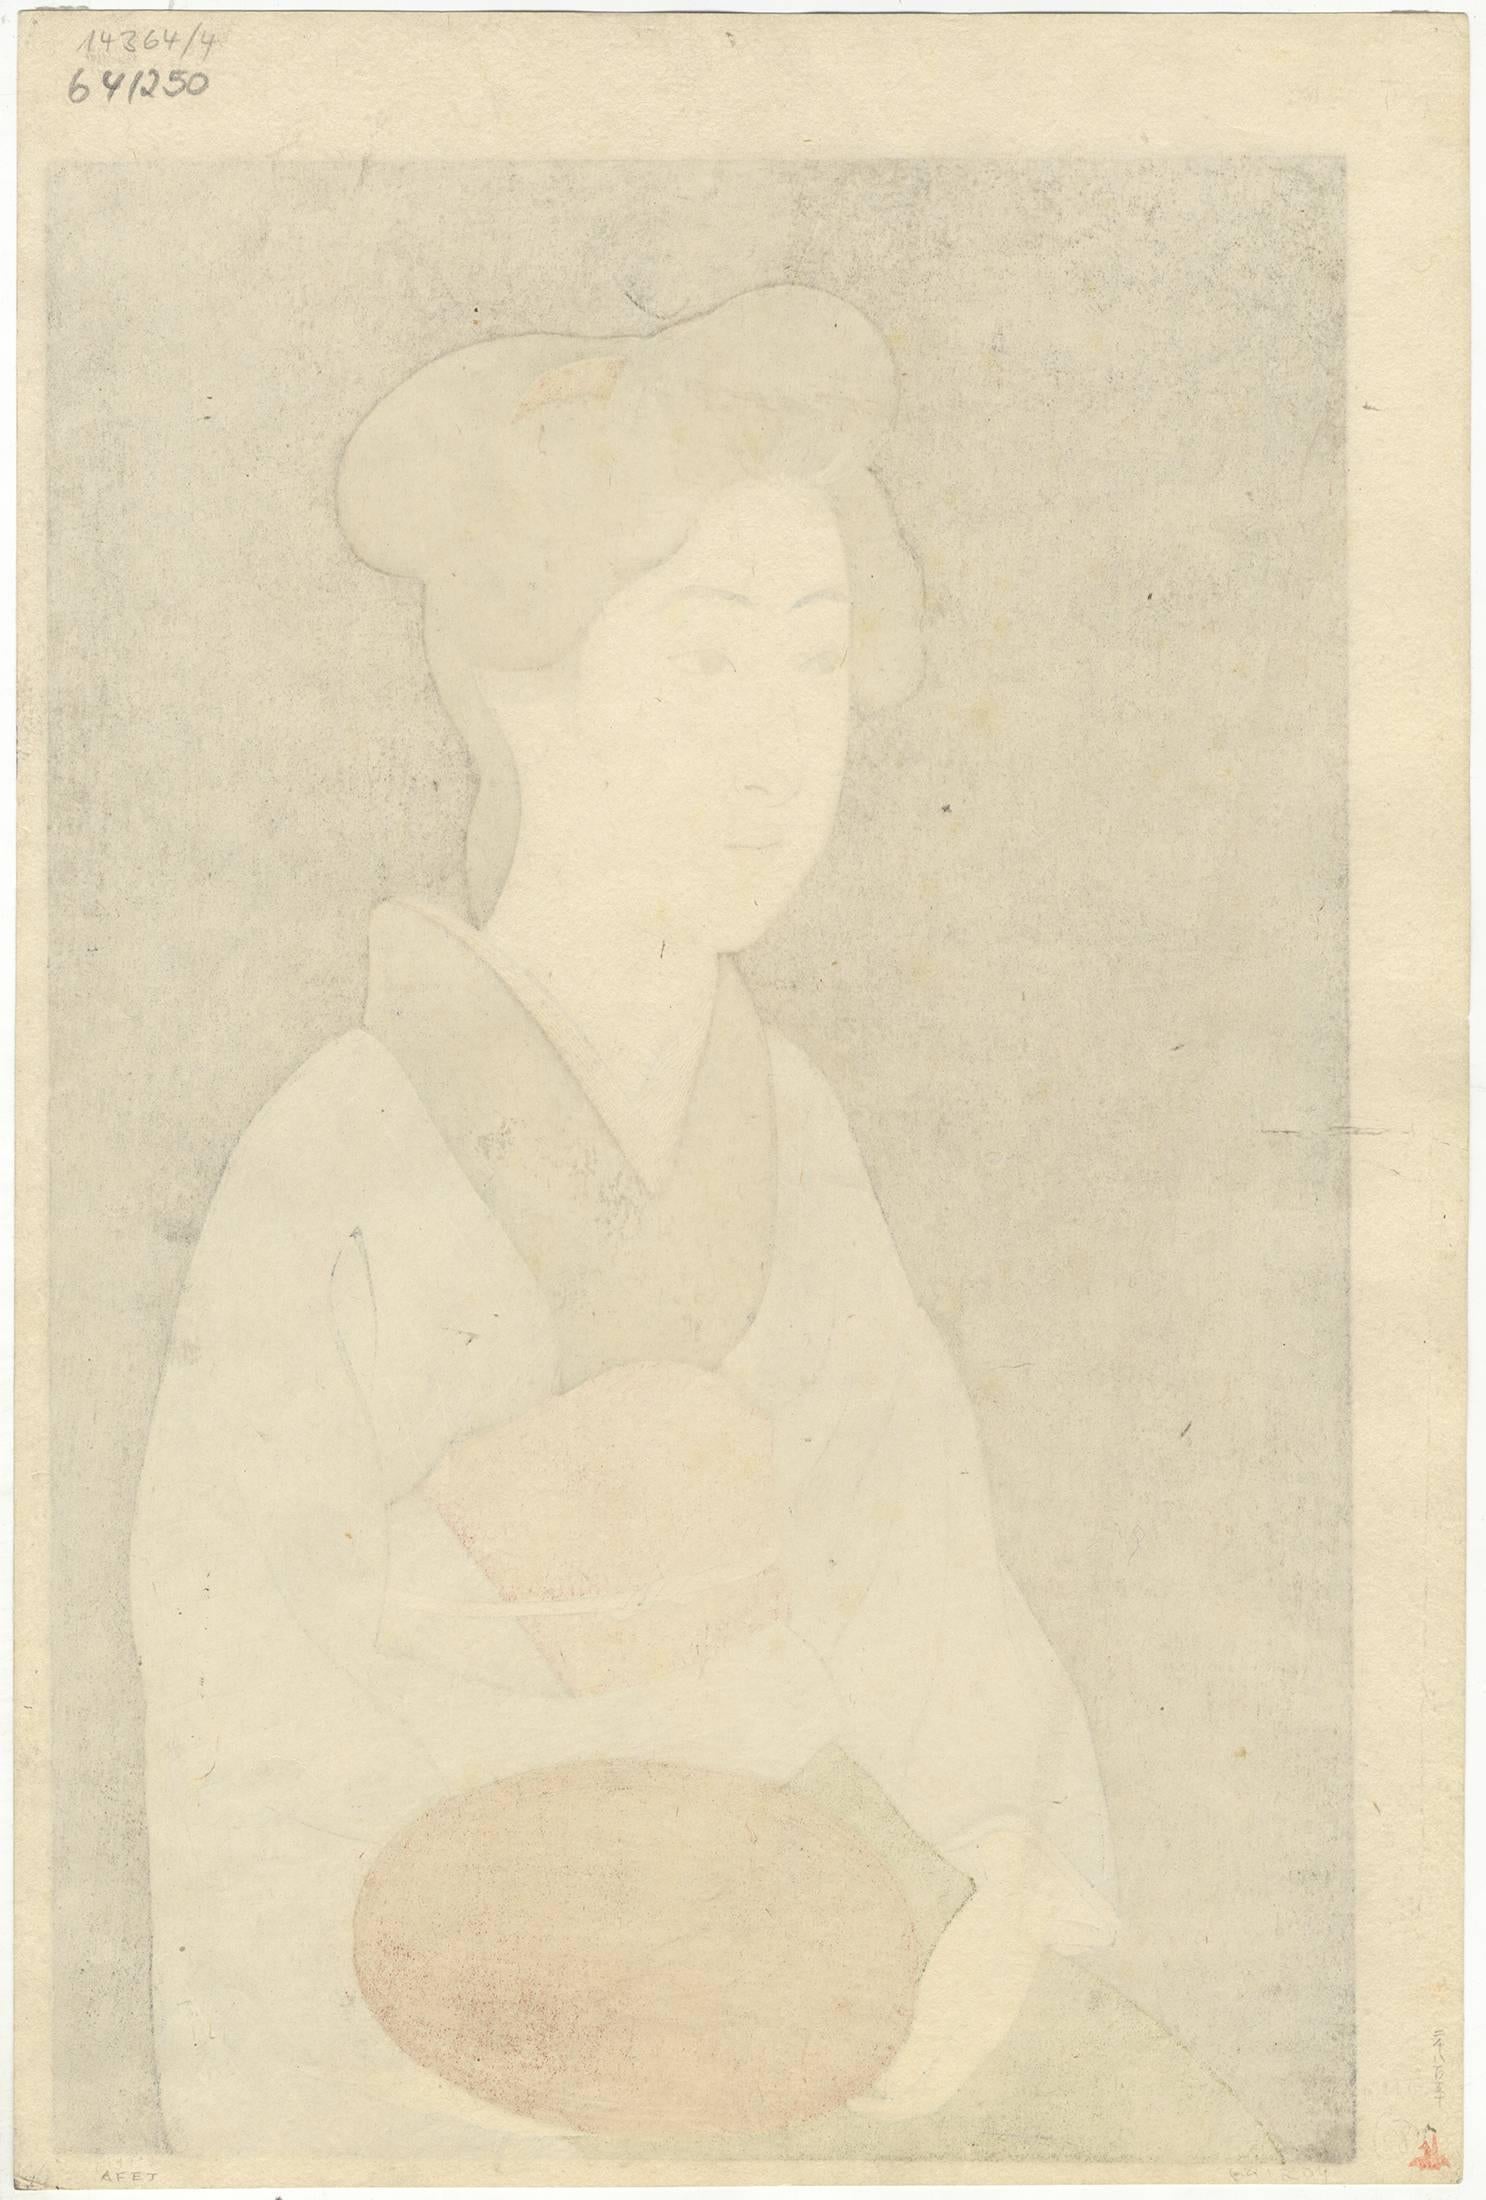 Hand-printed on traditional Japanese washi paper (mulberry tree paper).
Artist: Goyo Hashiguchi
Title: Portrait of a waitress

In this print, a waitress holds a red lacquered round tray on her lap. Dark grey mica is applied on the background of the